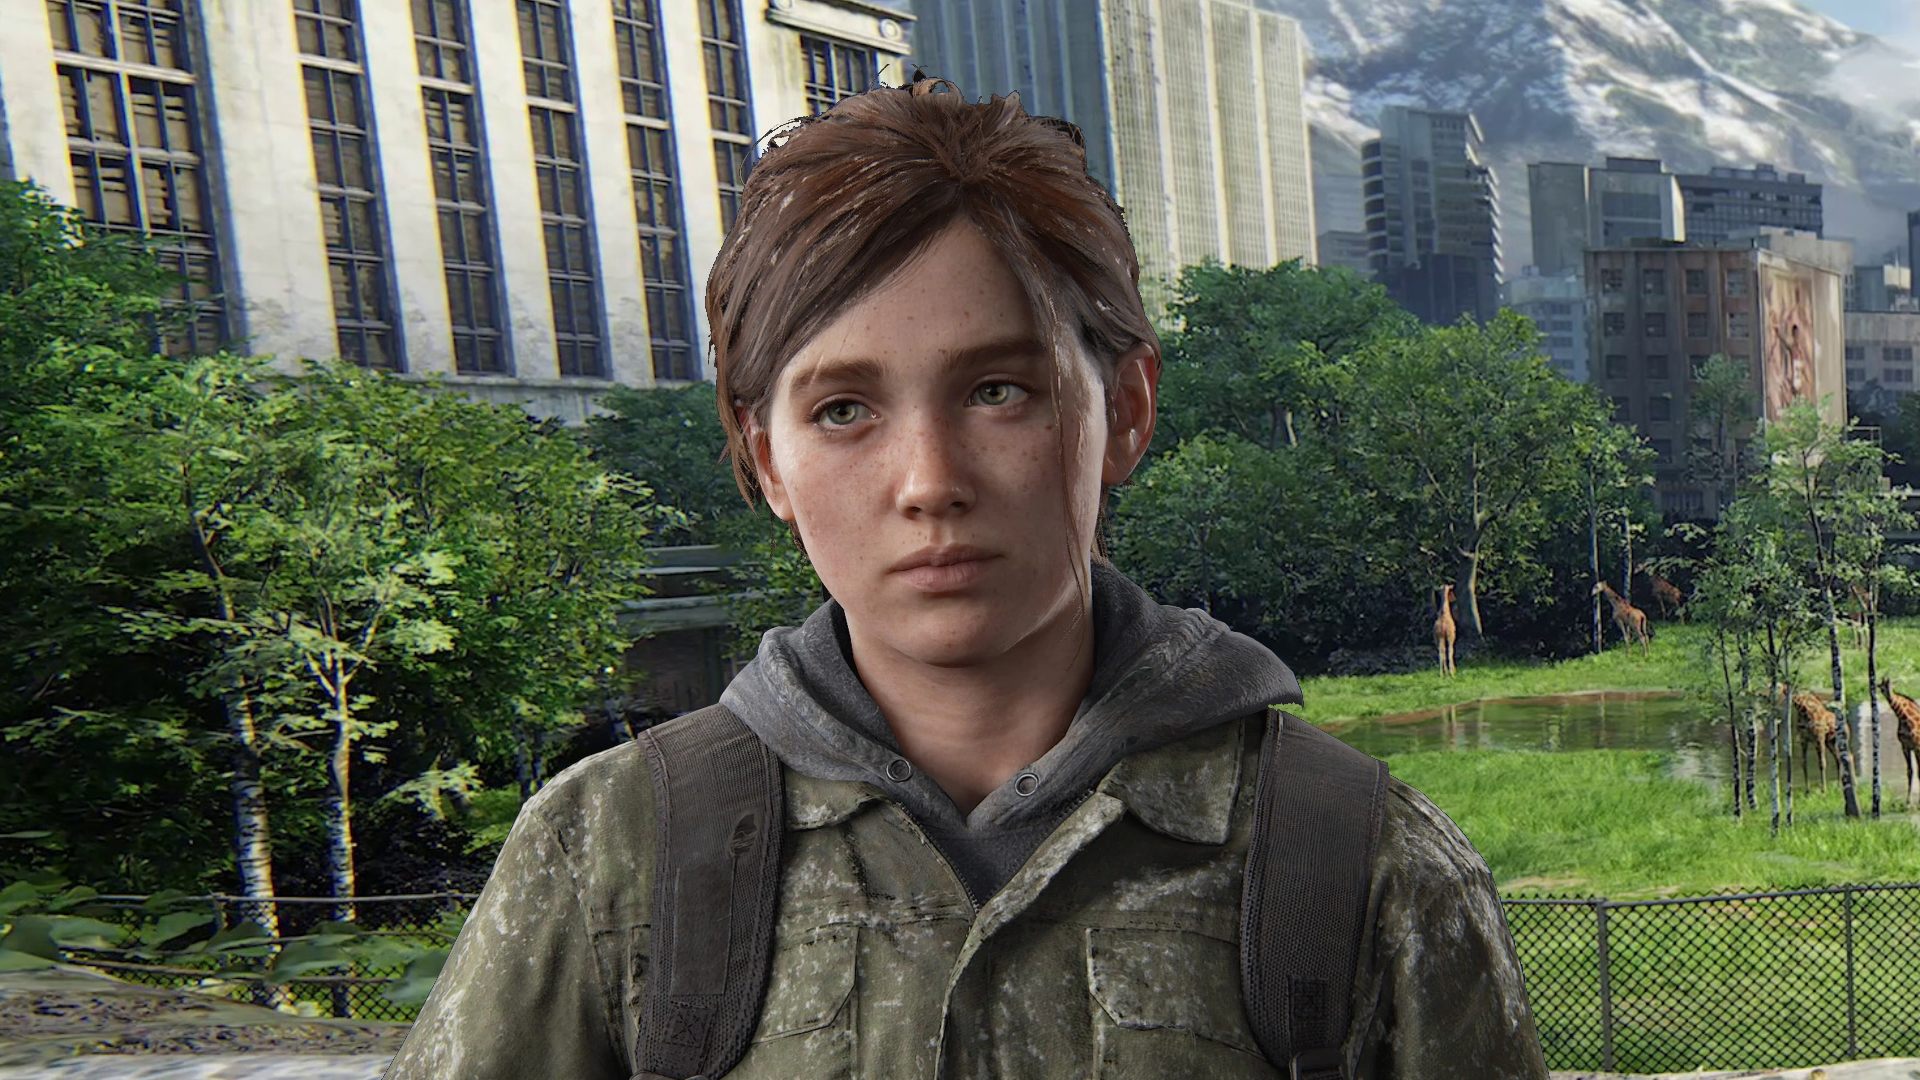 How to fix The Last of Us building shaders issue